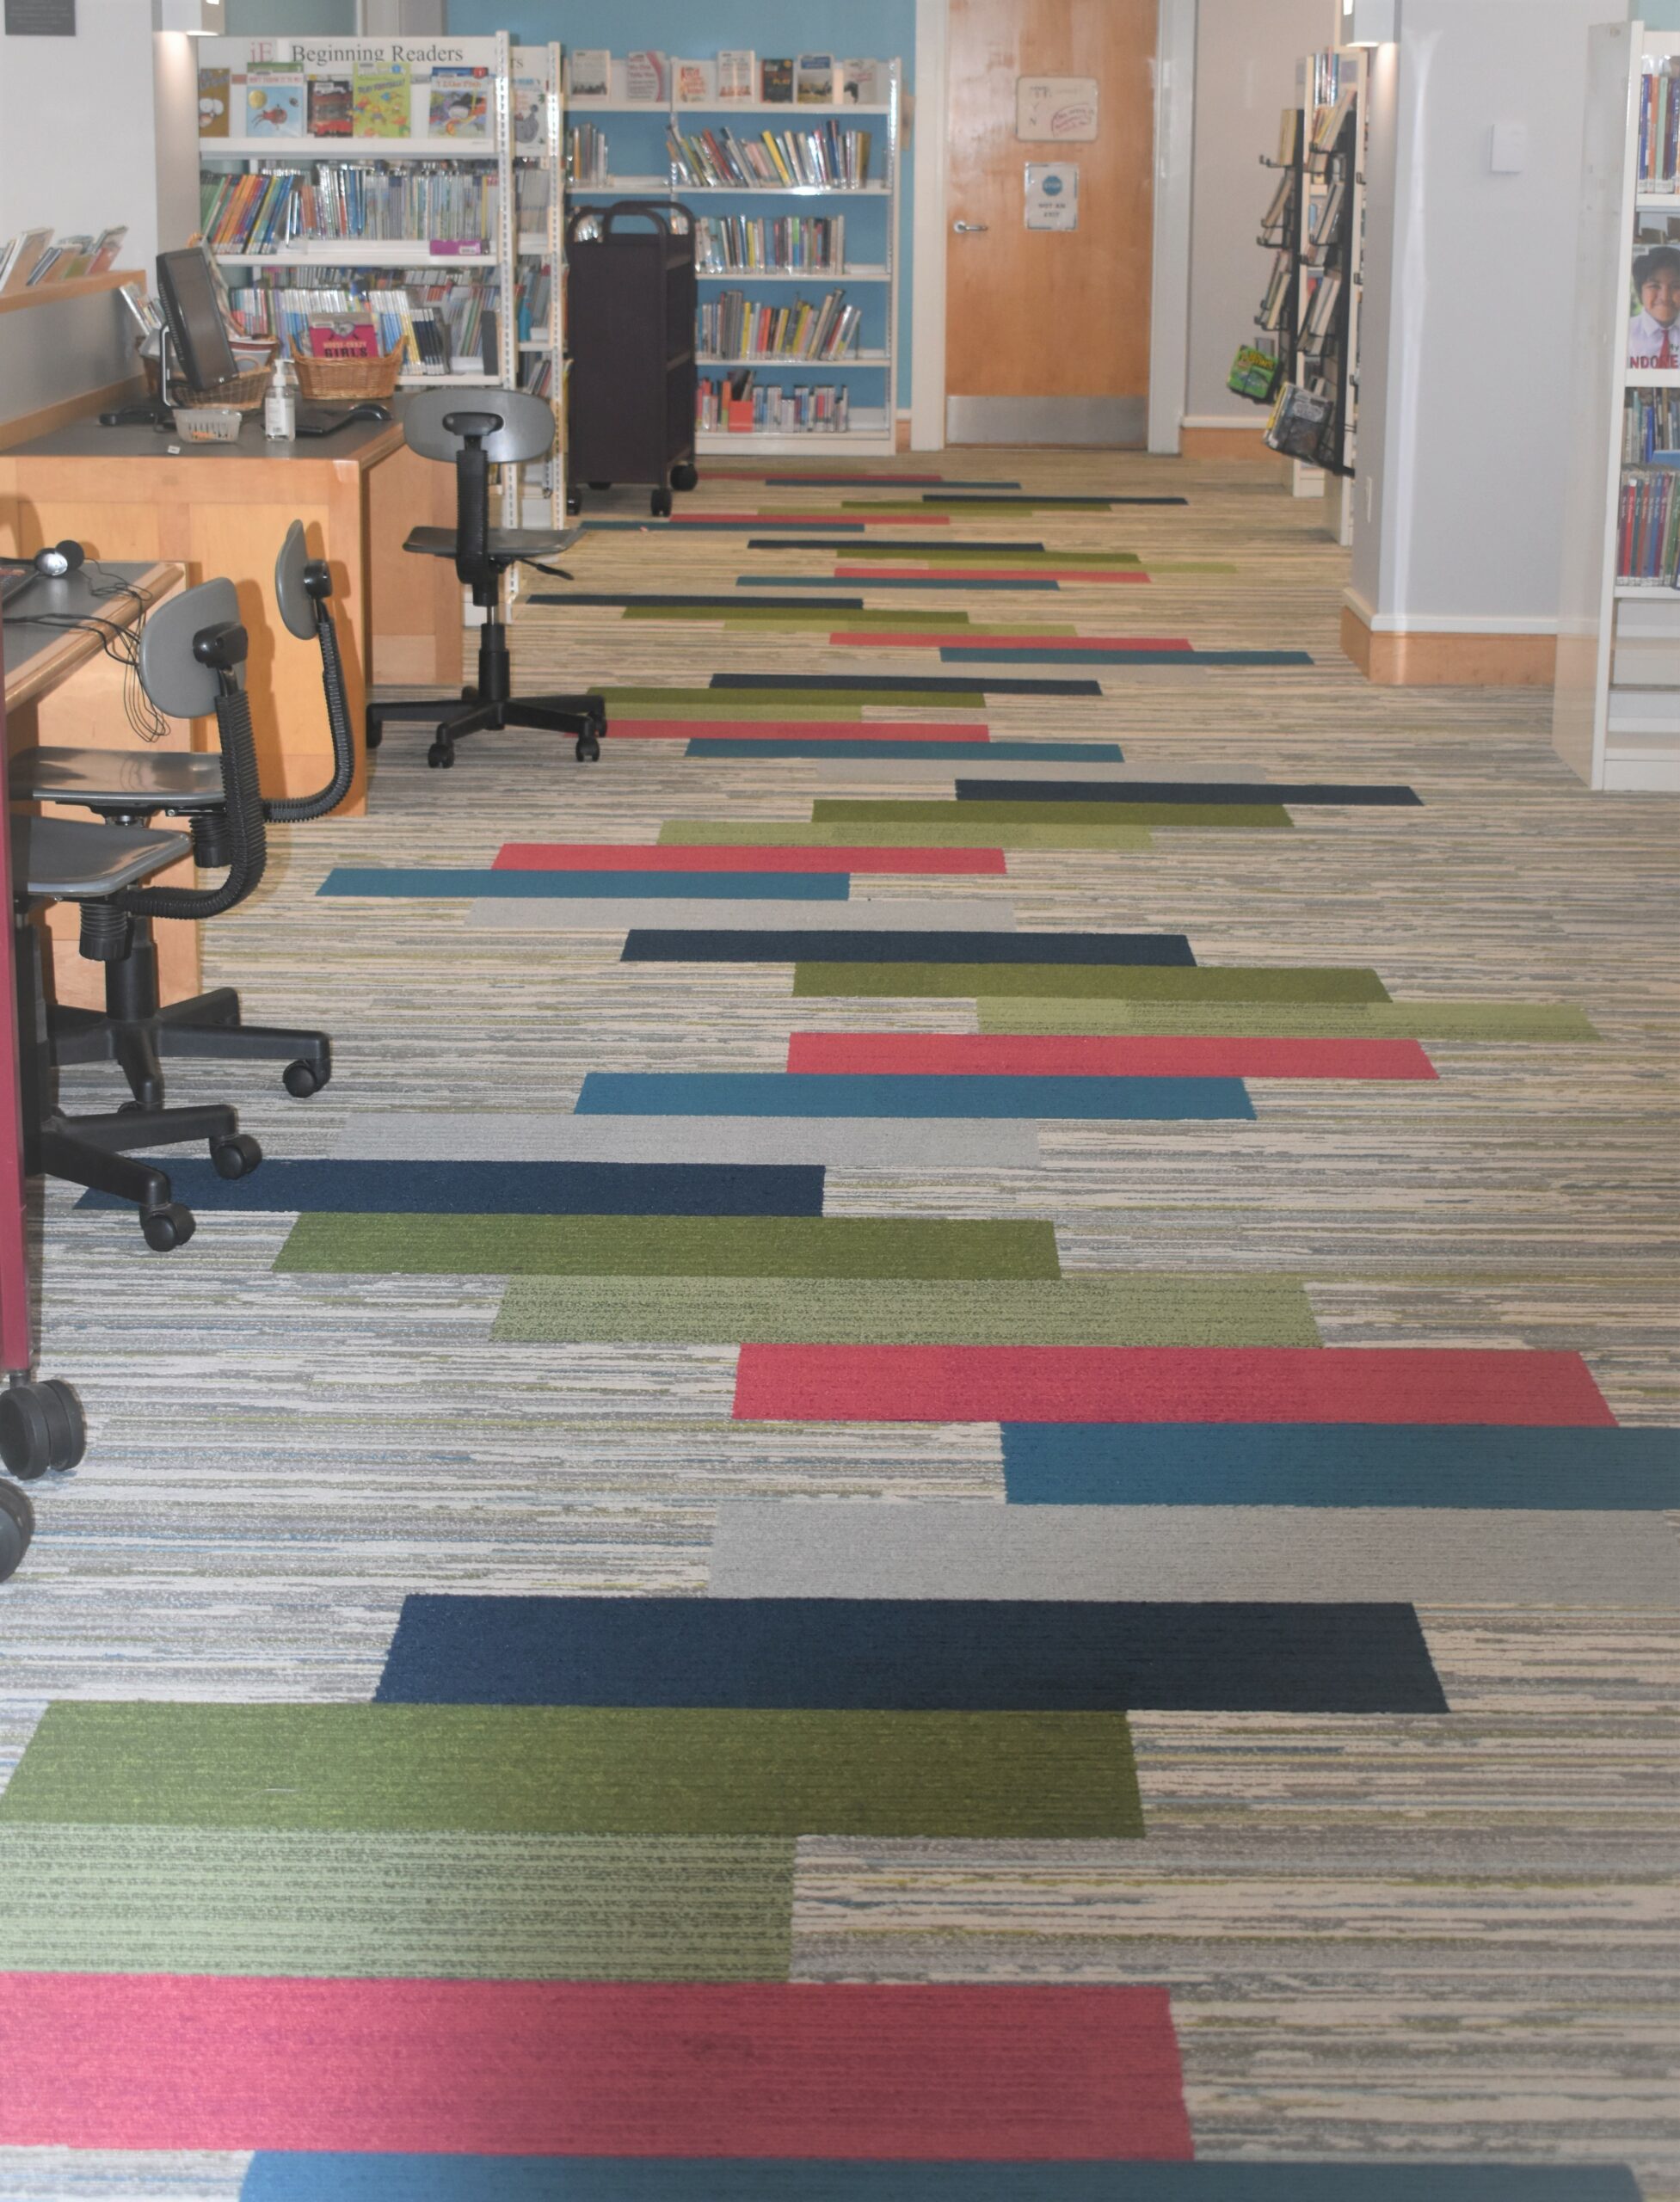 Capozza Tile - Commercial - Curtis Memorial Library - Hallway - color blocking - whimsical - linear - colorful - Interface - Carpet Tile